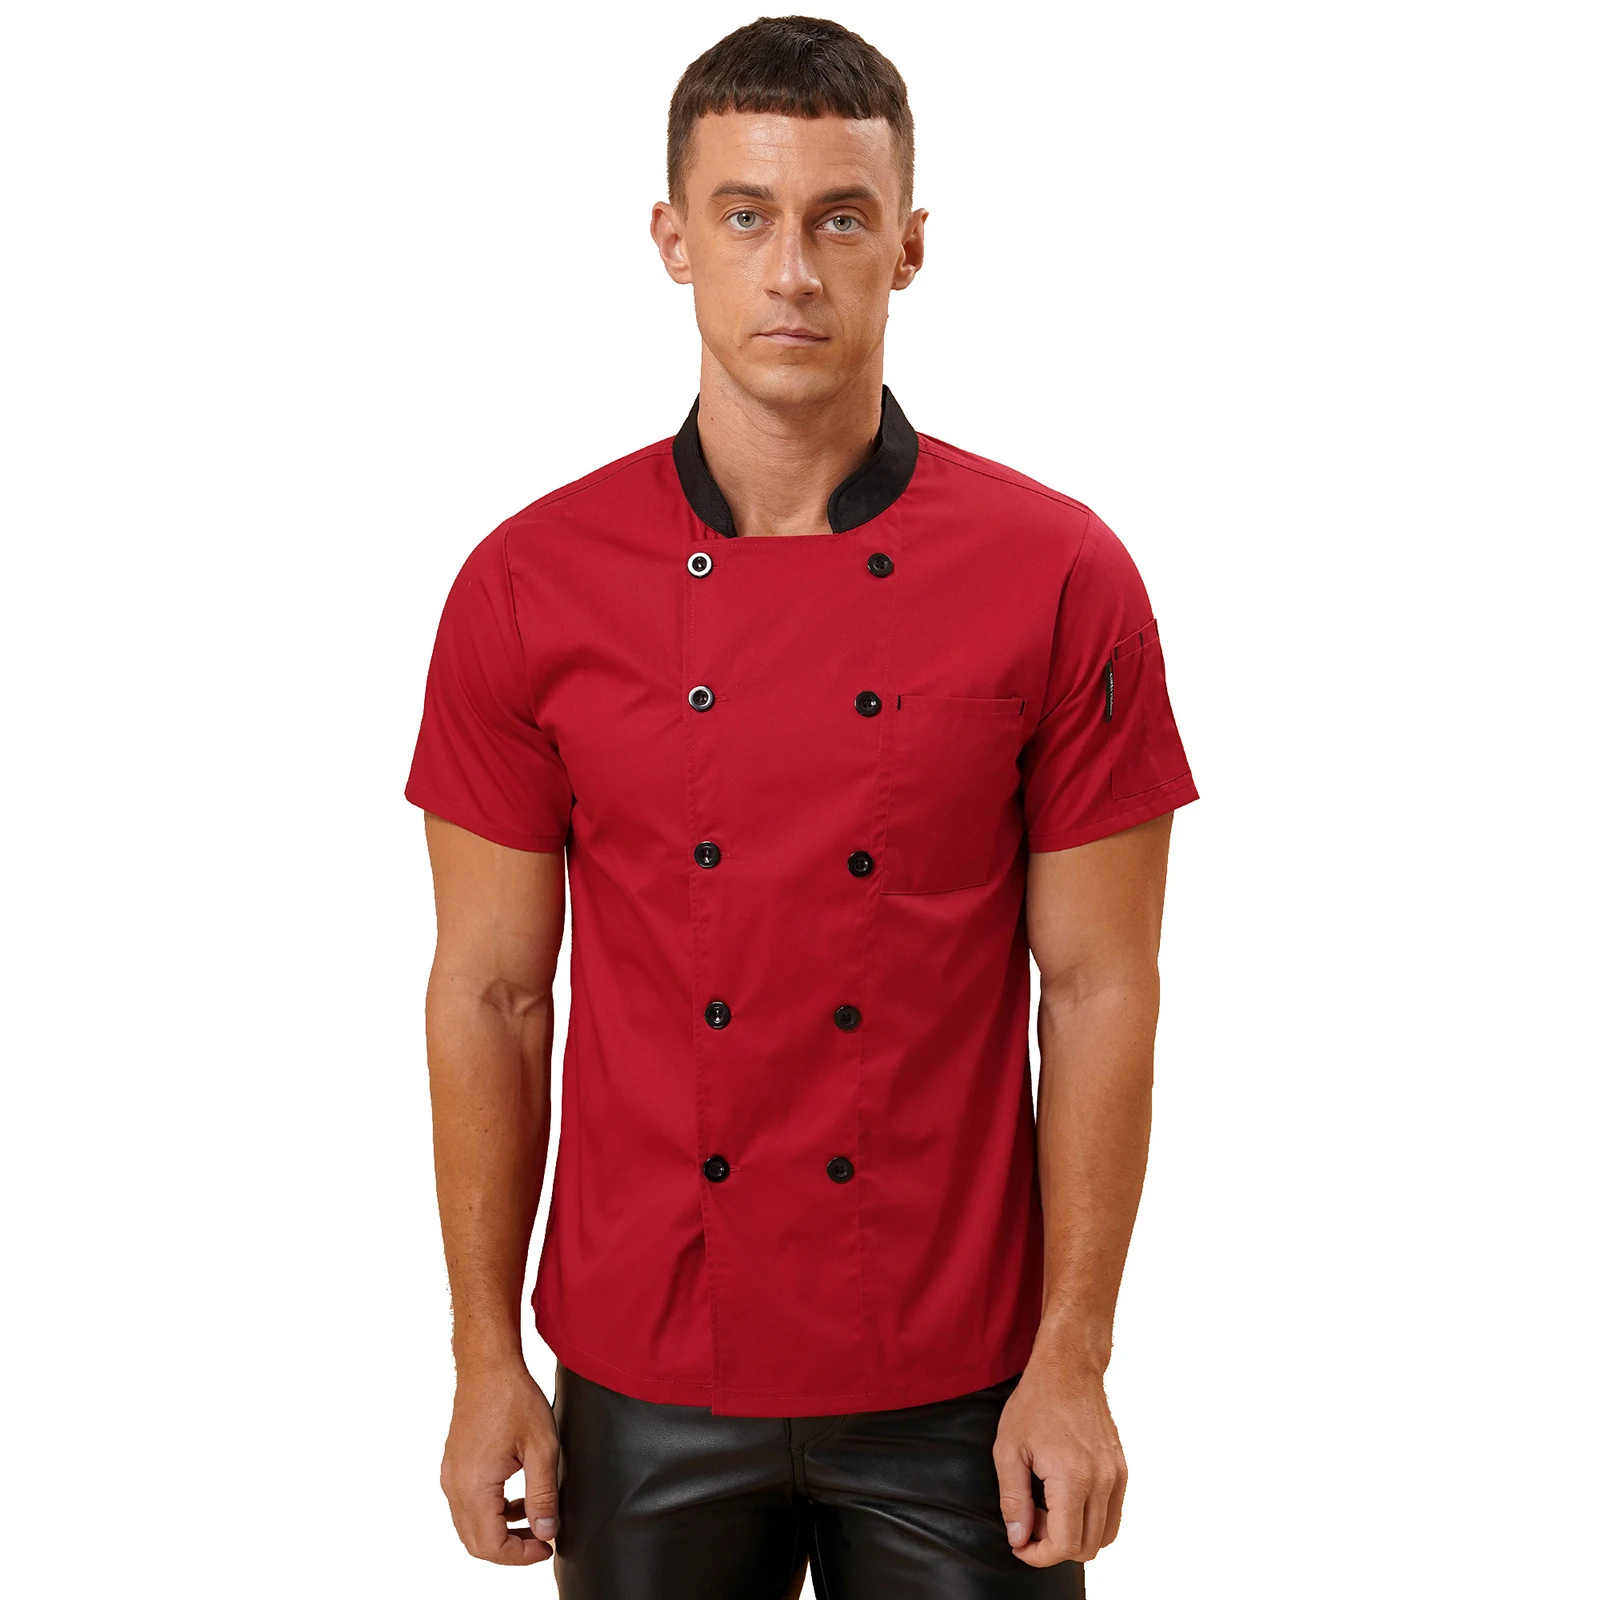 Mens Hotel Restaurant Kitchen Uniform New Chef Jacket Breathable Short Sleeve Chef Shirt Stand Collar Cooks Jacket 2023 new unisex restaurant kitchen chef uniform shirt short sleeve chef jacket work clothes